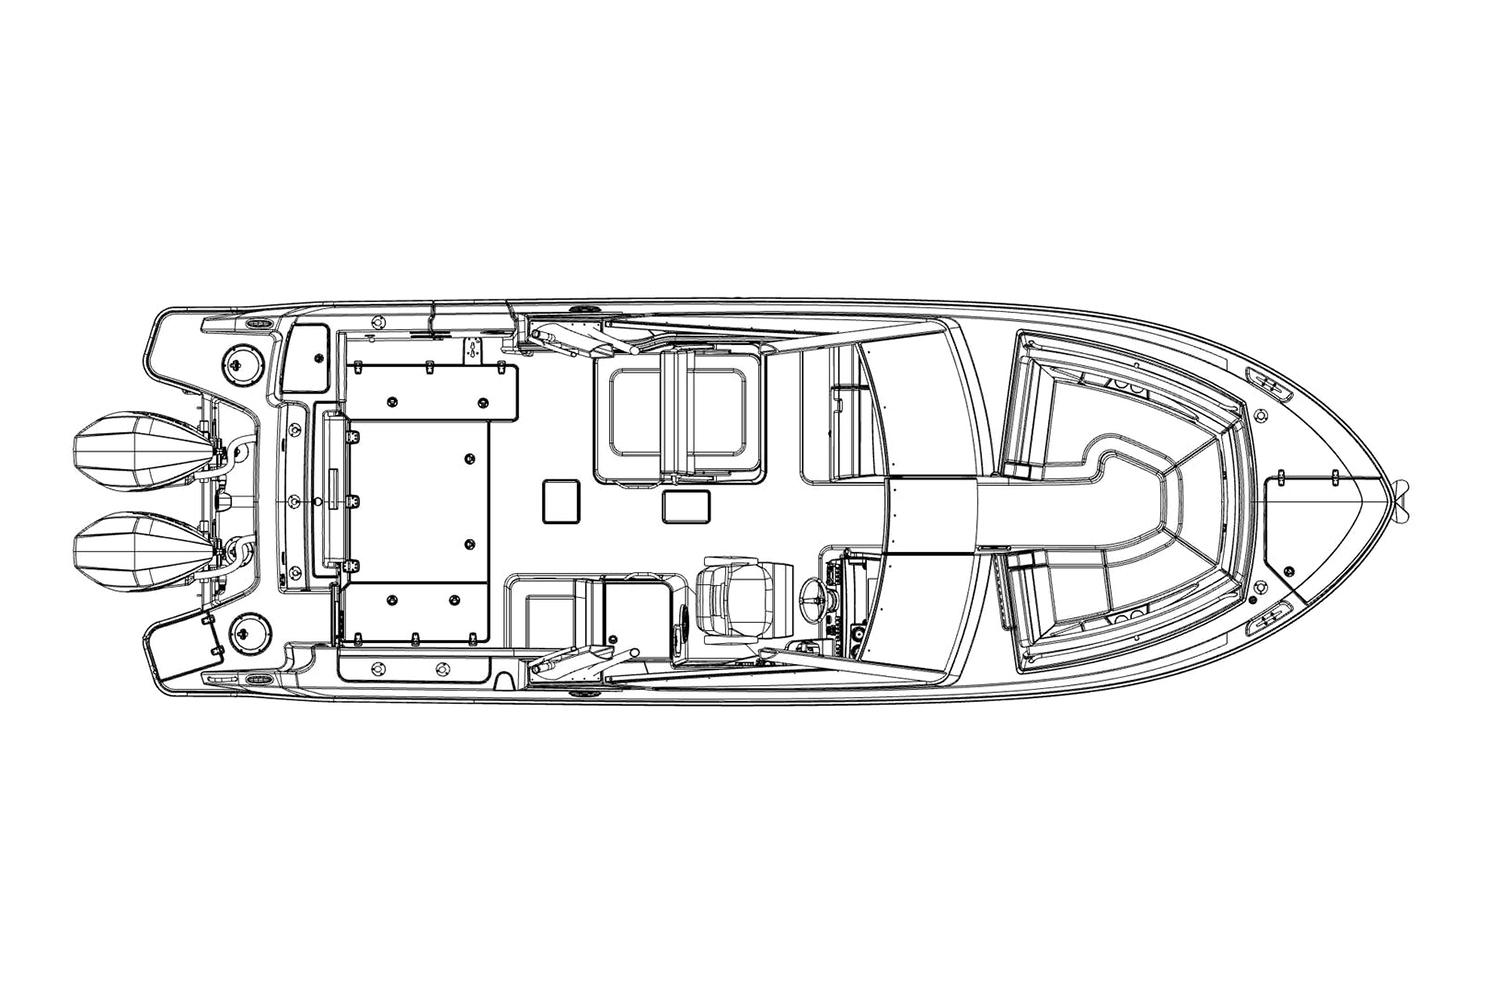 Image of Boat